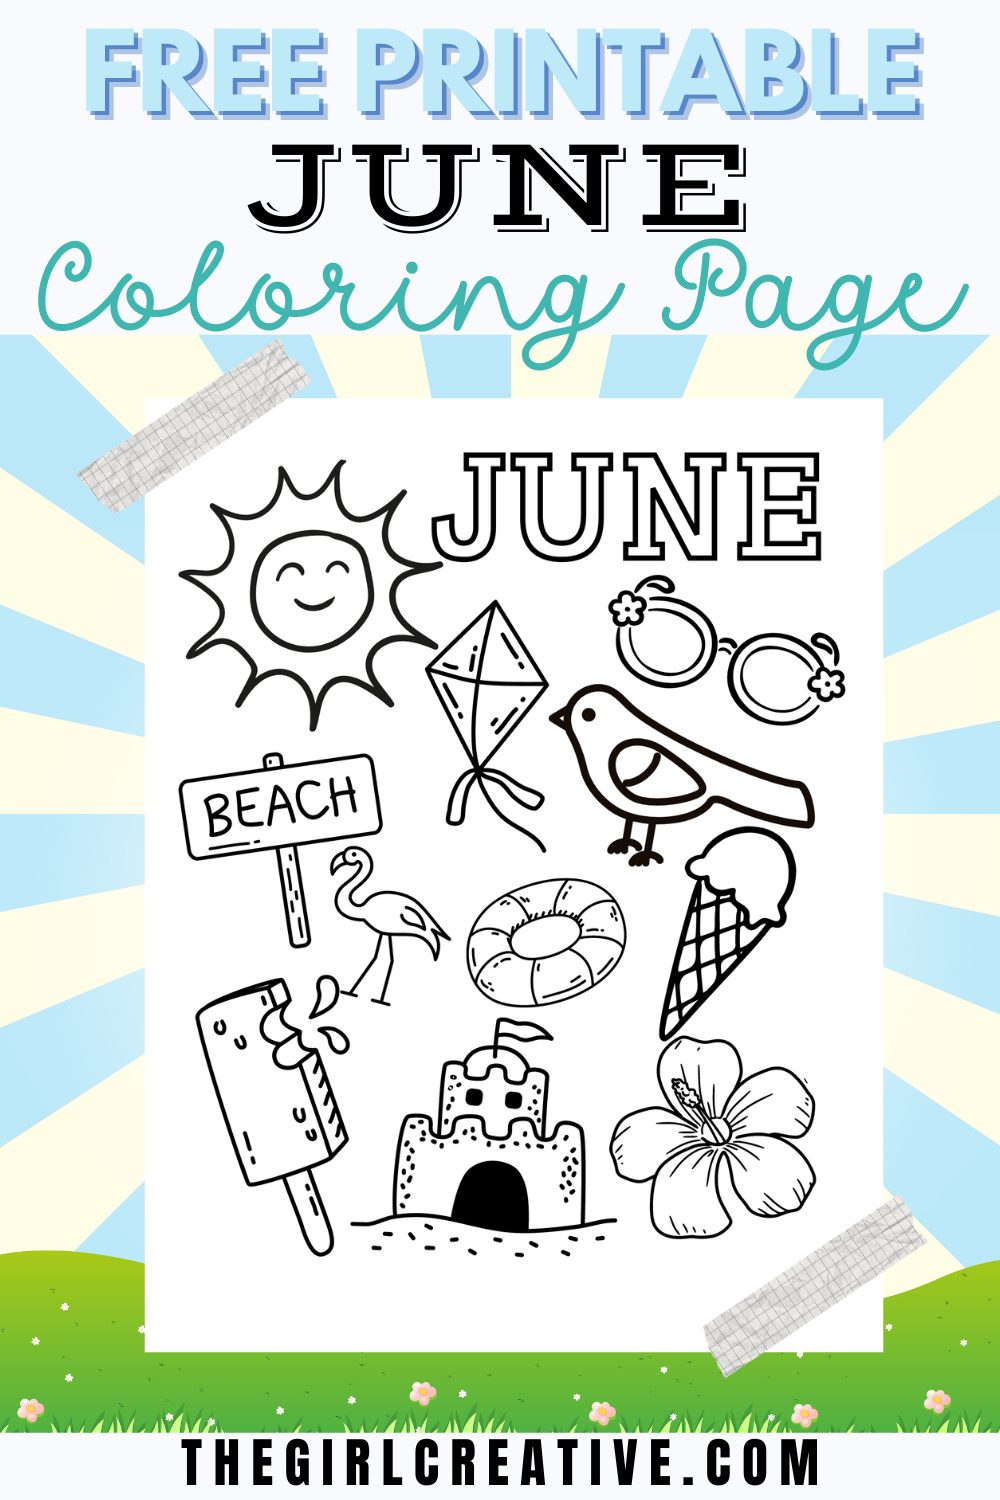 Free Printable Coloring Page for June